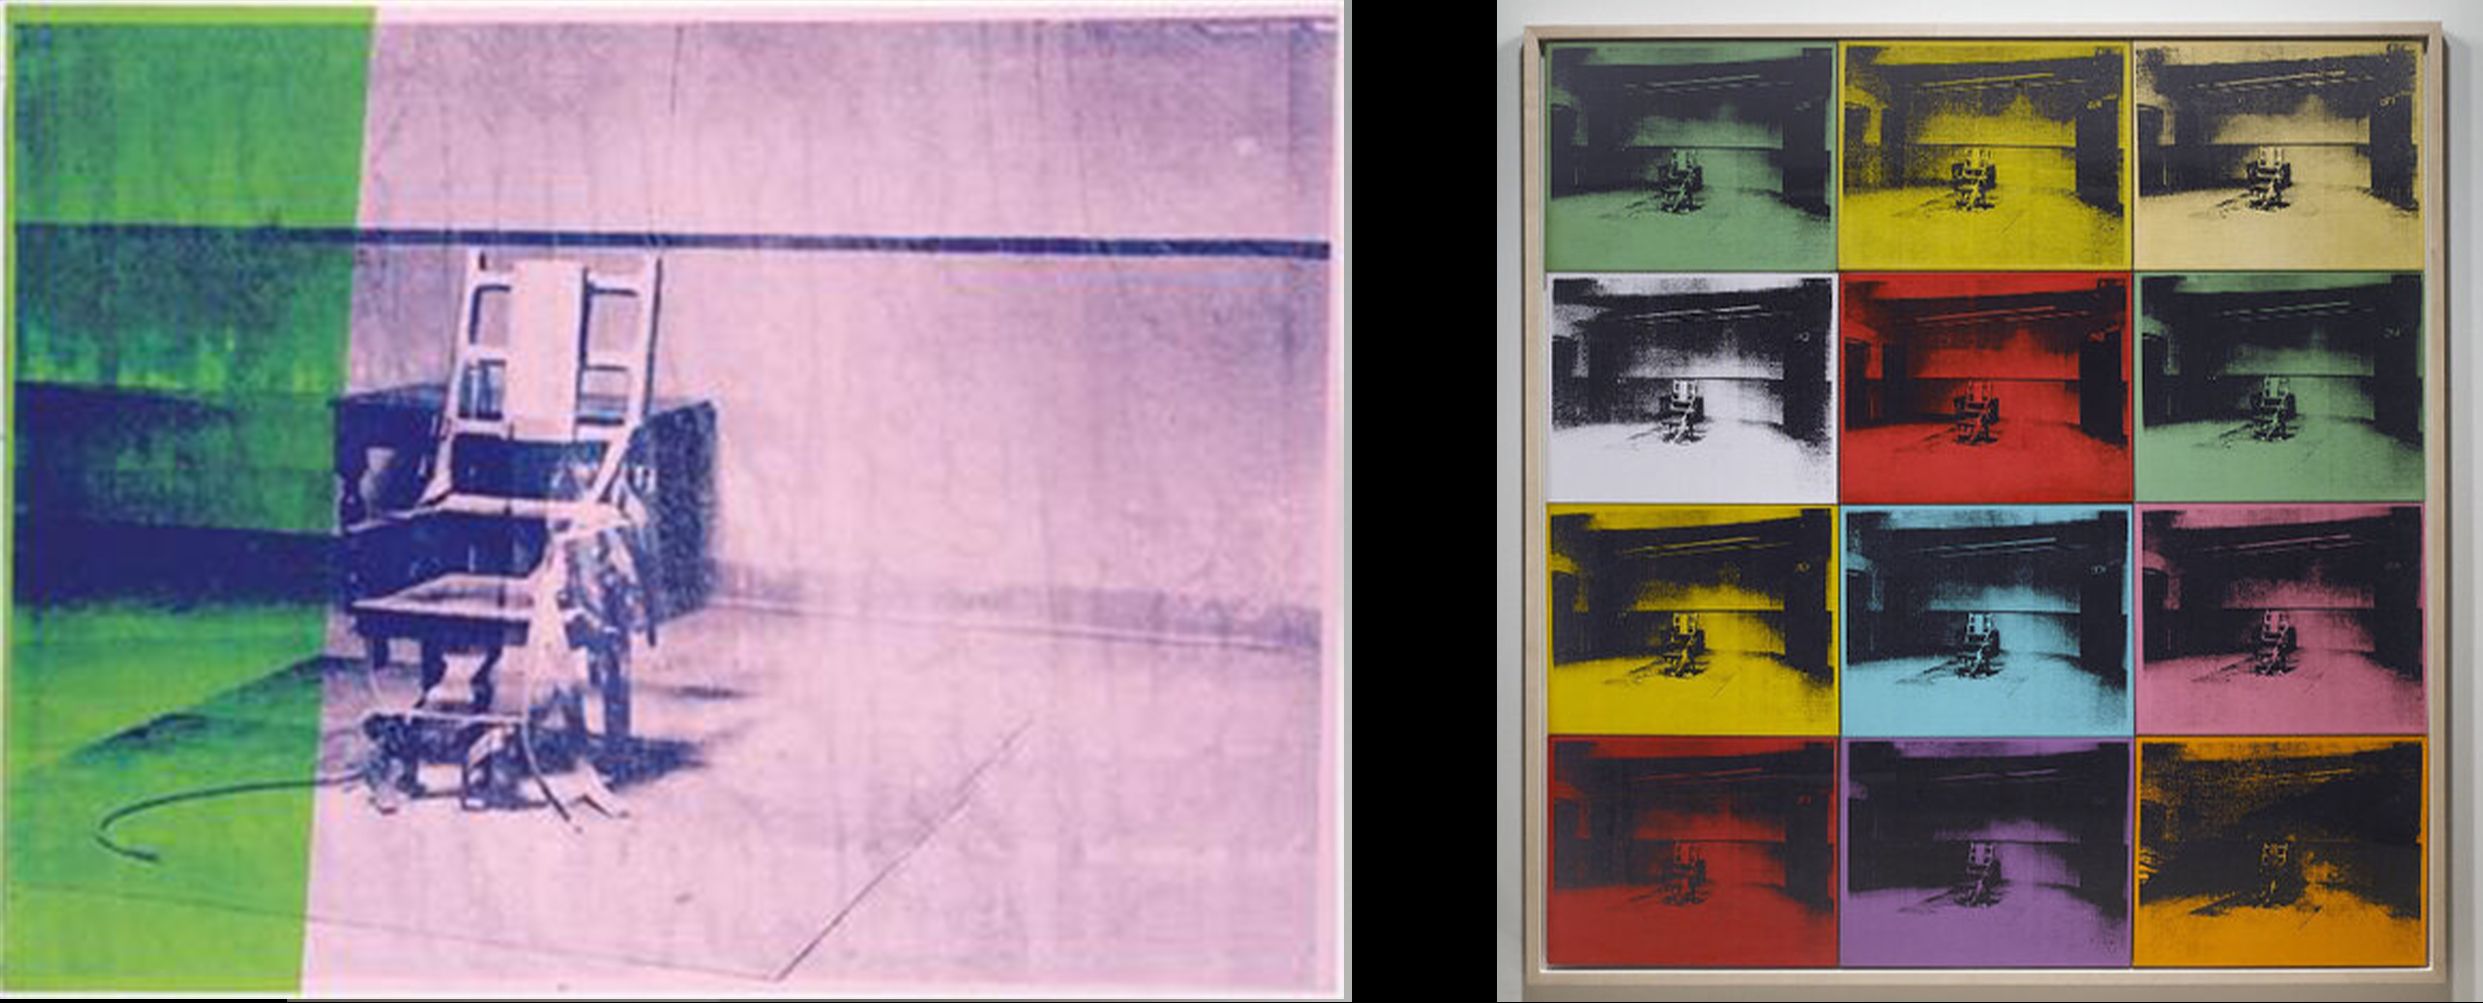 “Death and Disaster” series by Andy Warhol — “Big Electric Chair” 1967 (54 in × 73.0 in) and “Twelve Electric Chairs” 1964, 88 1/2 x 84 1/4 inches. Both: Synthetic polymer paint and silkscreen ink on canvas